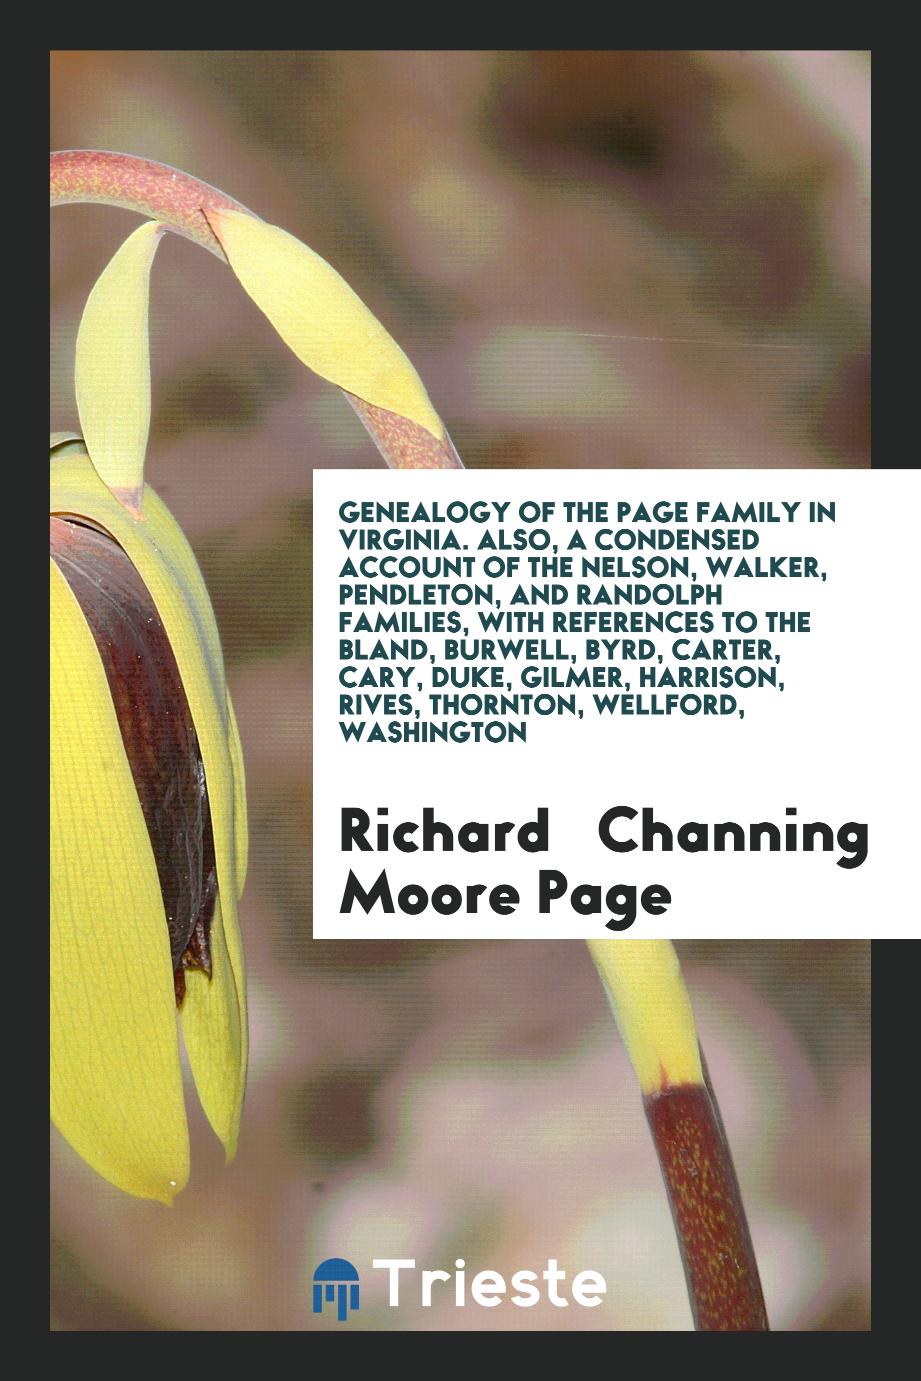 Genealogy of the Page Family in Virginia. Also, a Condensed Account of the Nelson, Walker, Pendleton, and Randolph Families, with References to the Bland, Burwell, Byrd, Carter, Cary, Duke, Gilmer, Harrison, Rives, Thornton, Wellford, Washington